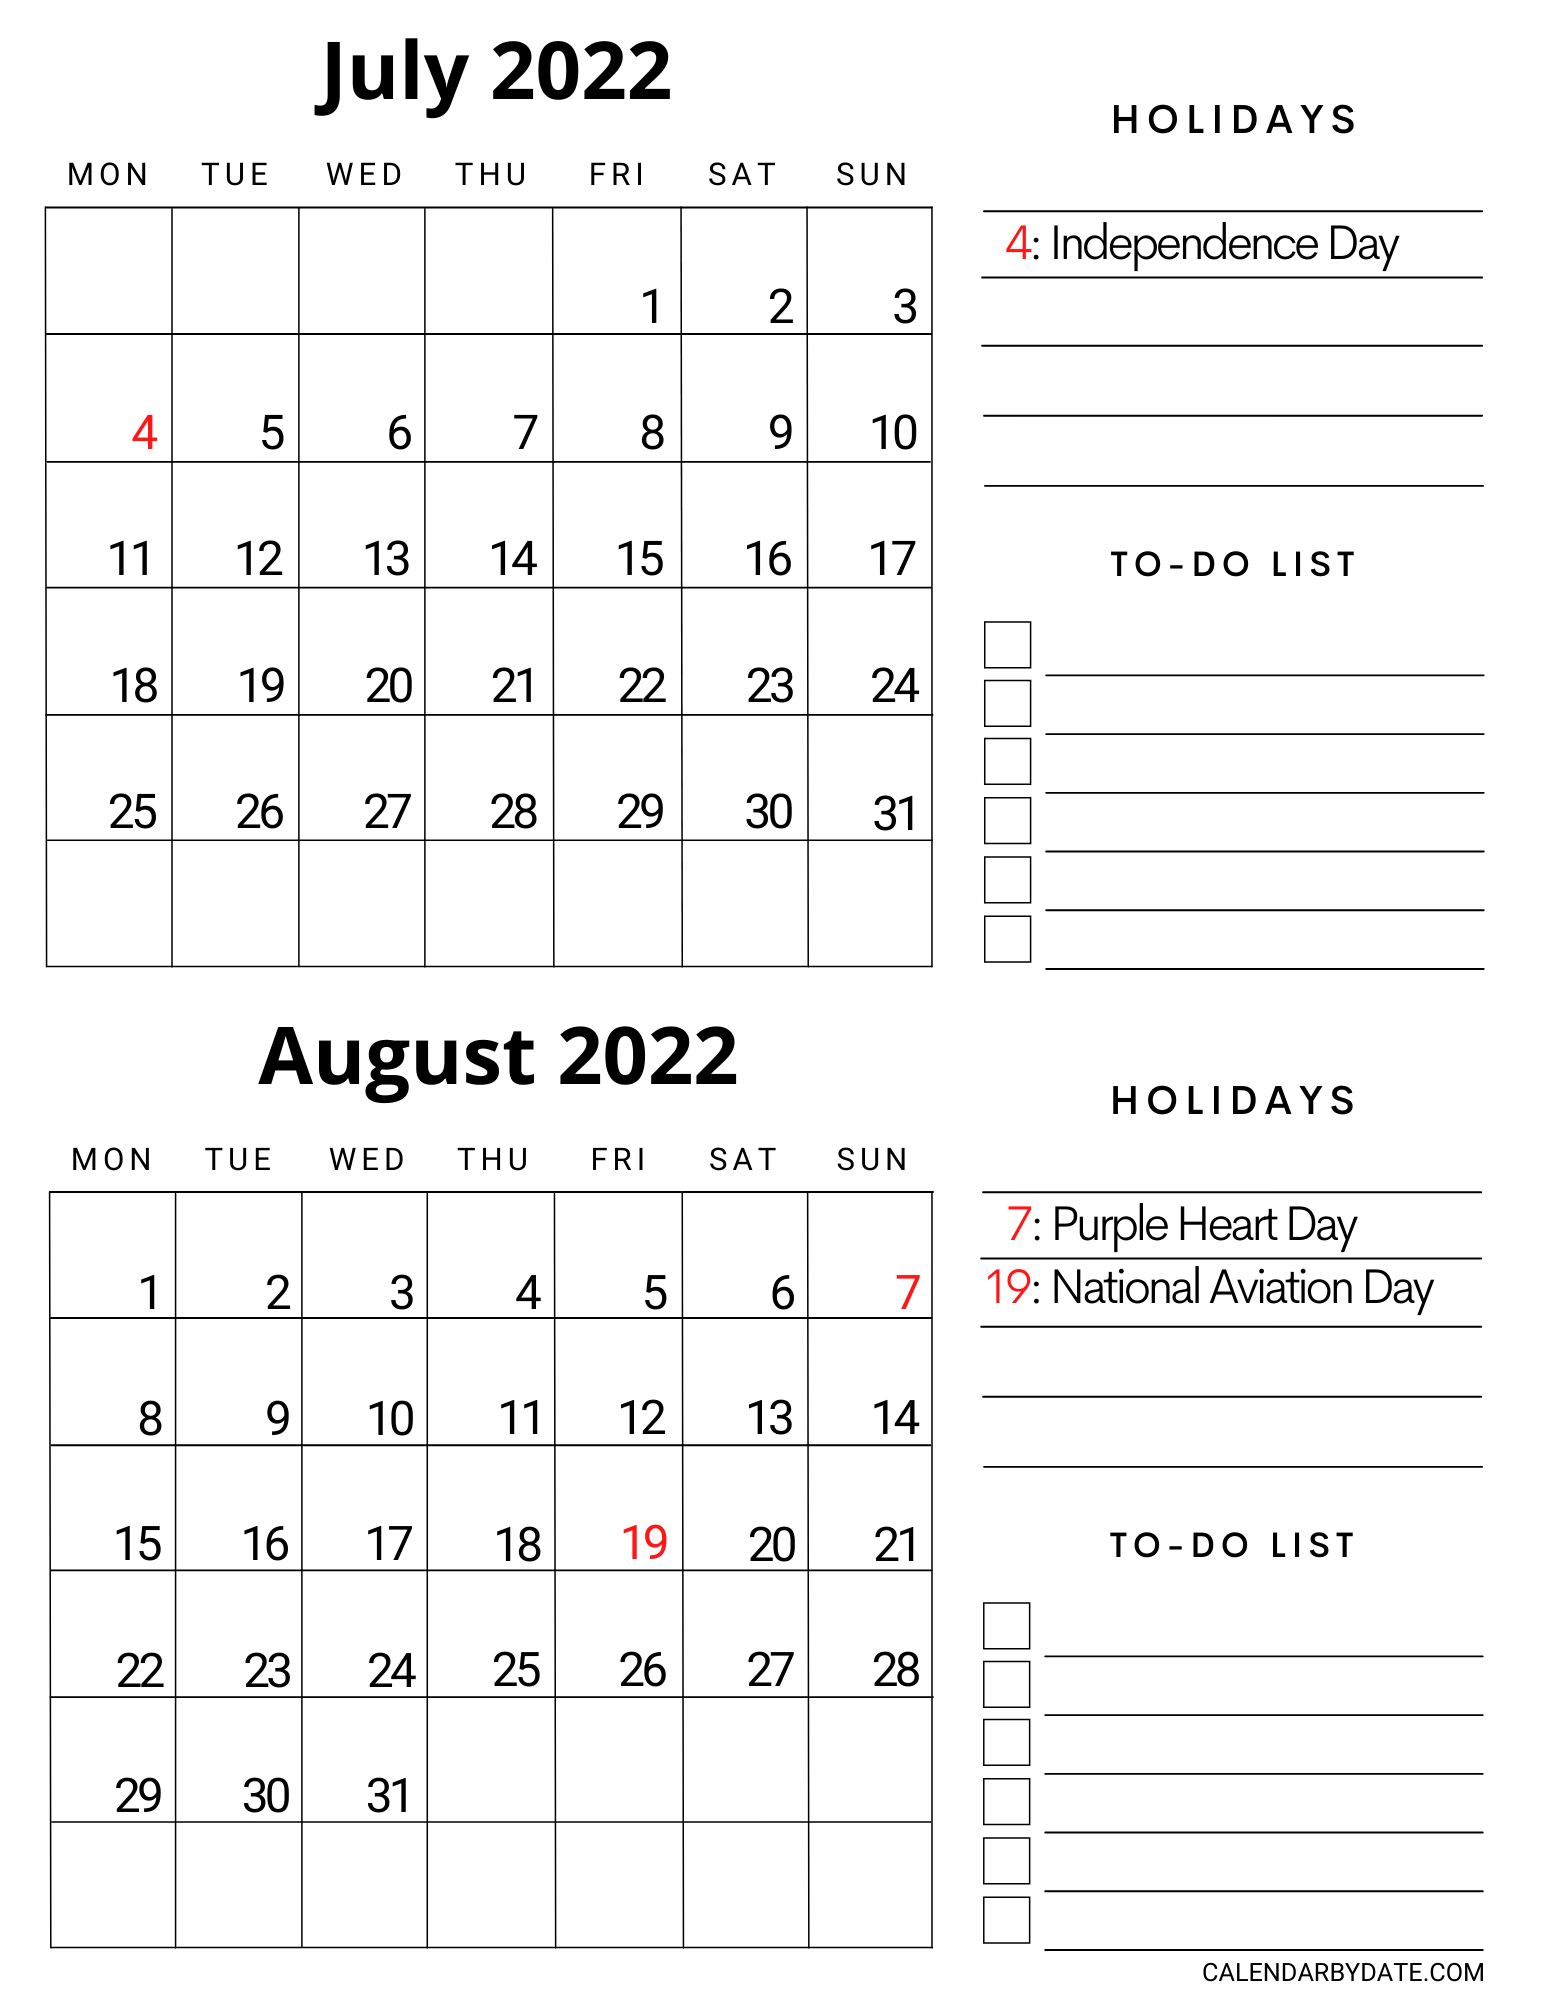 Two-month vertical calendar templates for July and August 2022 are designed with a list of US holidays and observances as well as a special blank notes space.